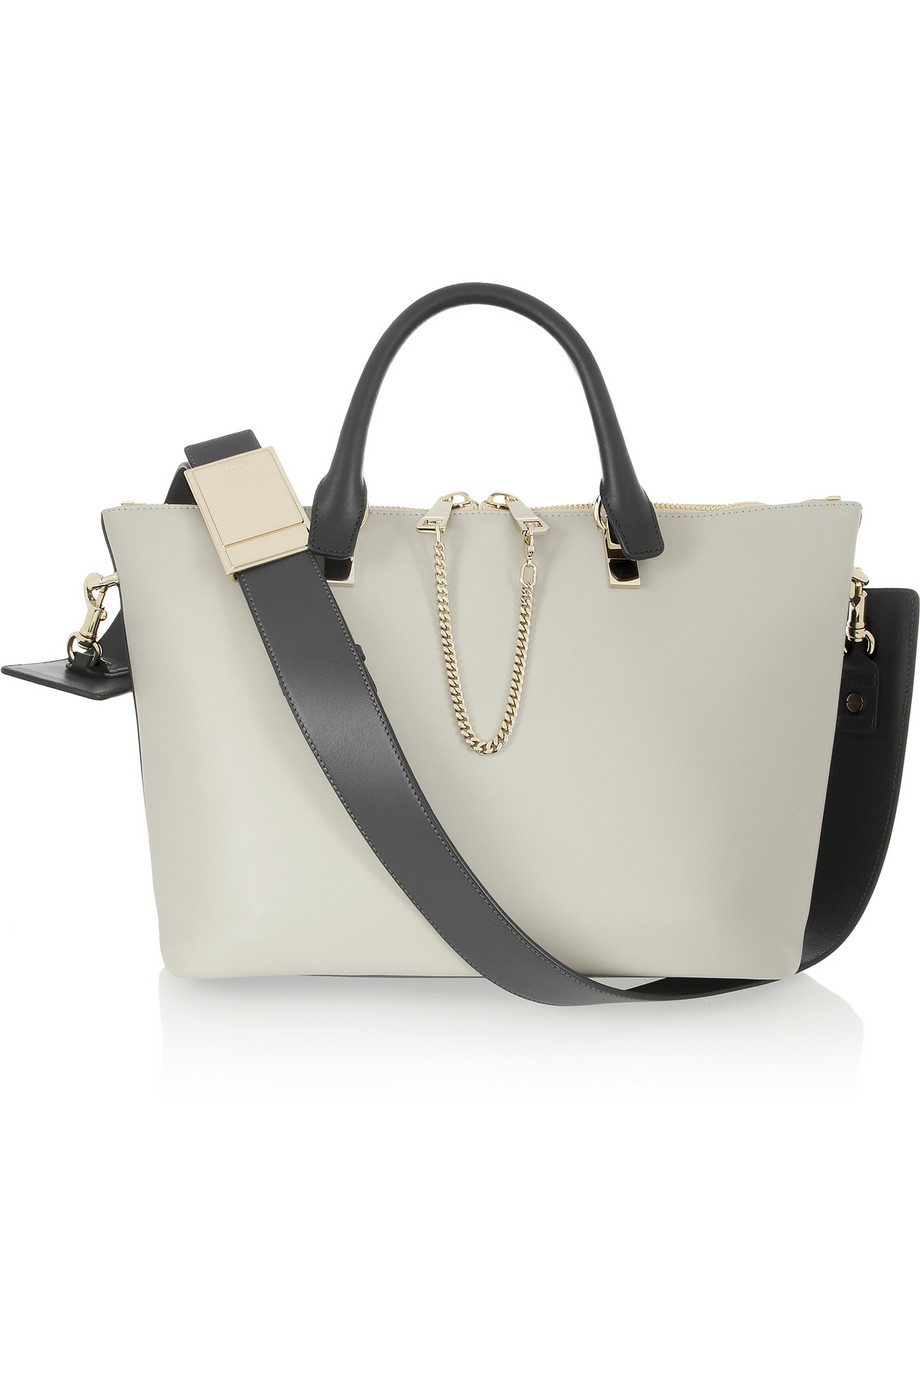 Lyst - Chloé Baylee Medium Leather Tote in Gray